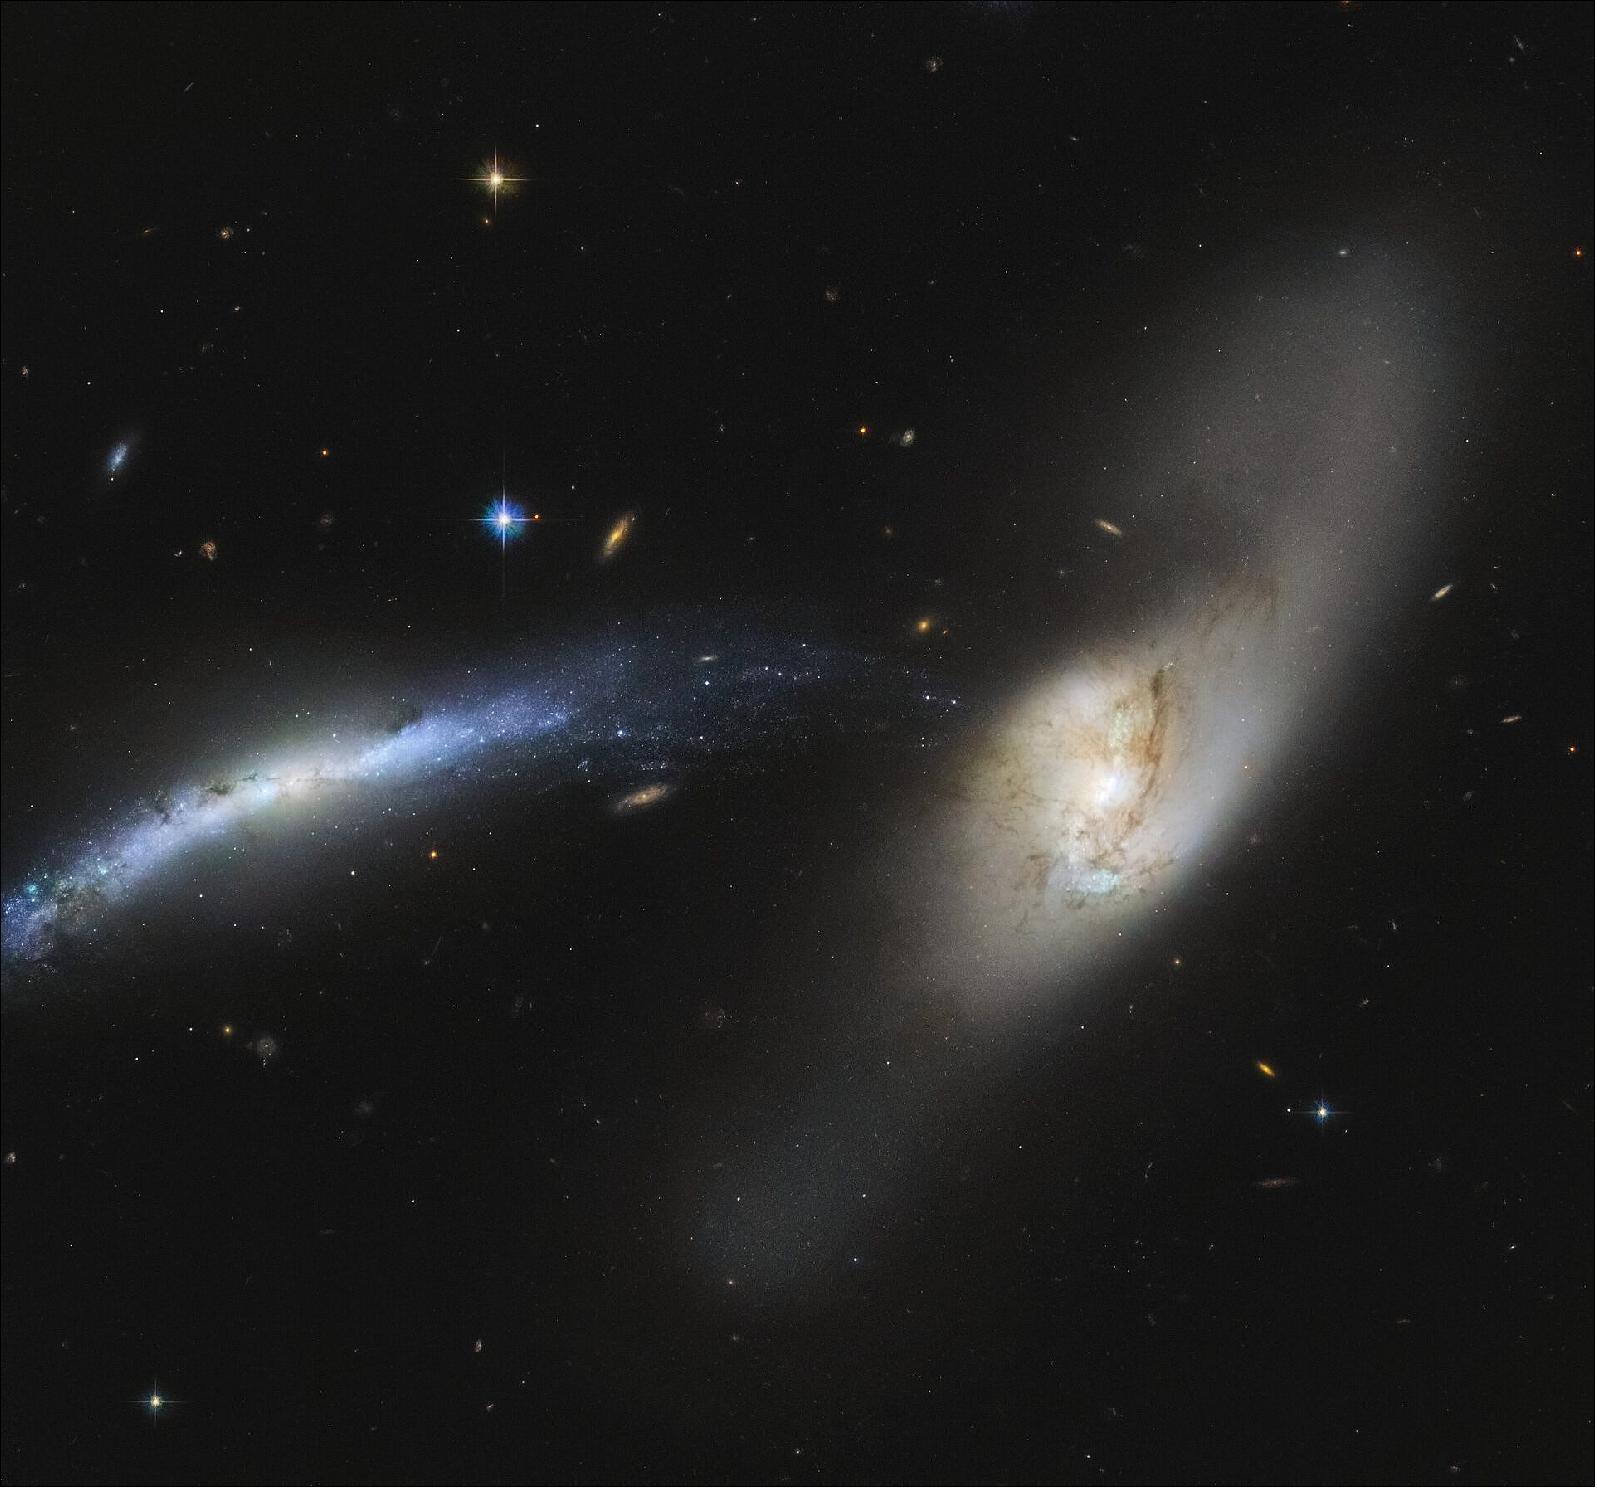 Figure 20: In this spectacular image captured by the NASA/ESA Hubble Space Telescope, the galaxy NGC 2799 (on the left) is seemingly being pulled into the center of the galaxy NGC 2798 (on the right), [image credit: ESA/Hubble & NASA, SDSS, J. Dalcanton, CC BY 4.0; Acknowledgement: Judy Schmidt (Geckzilla)]